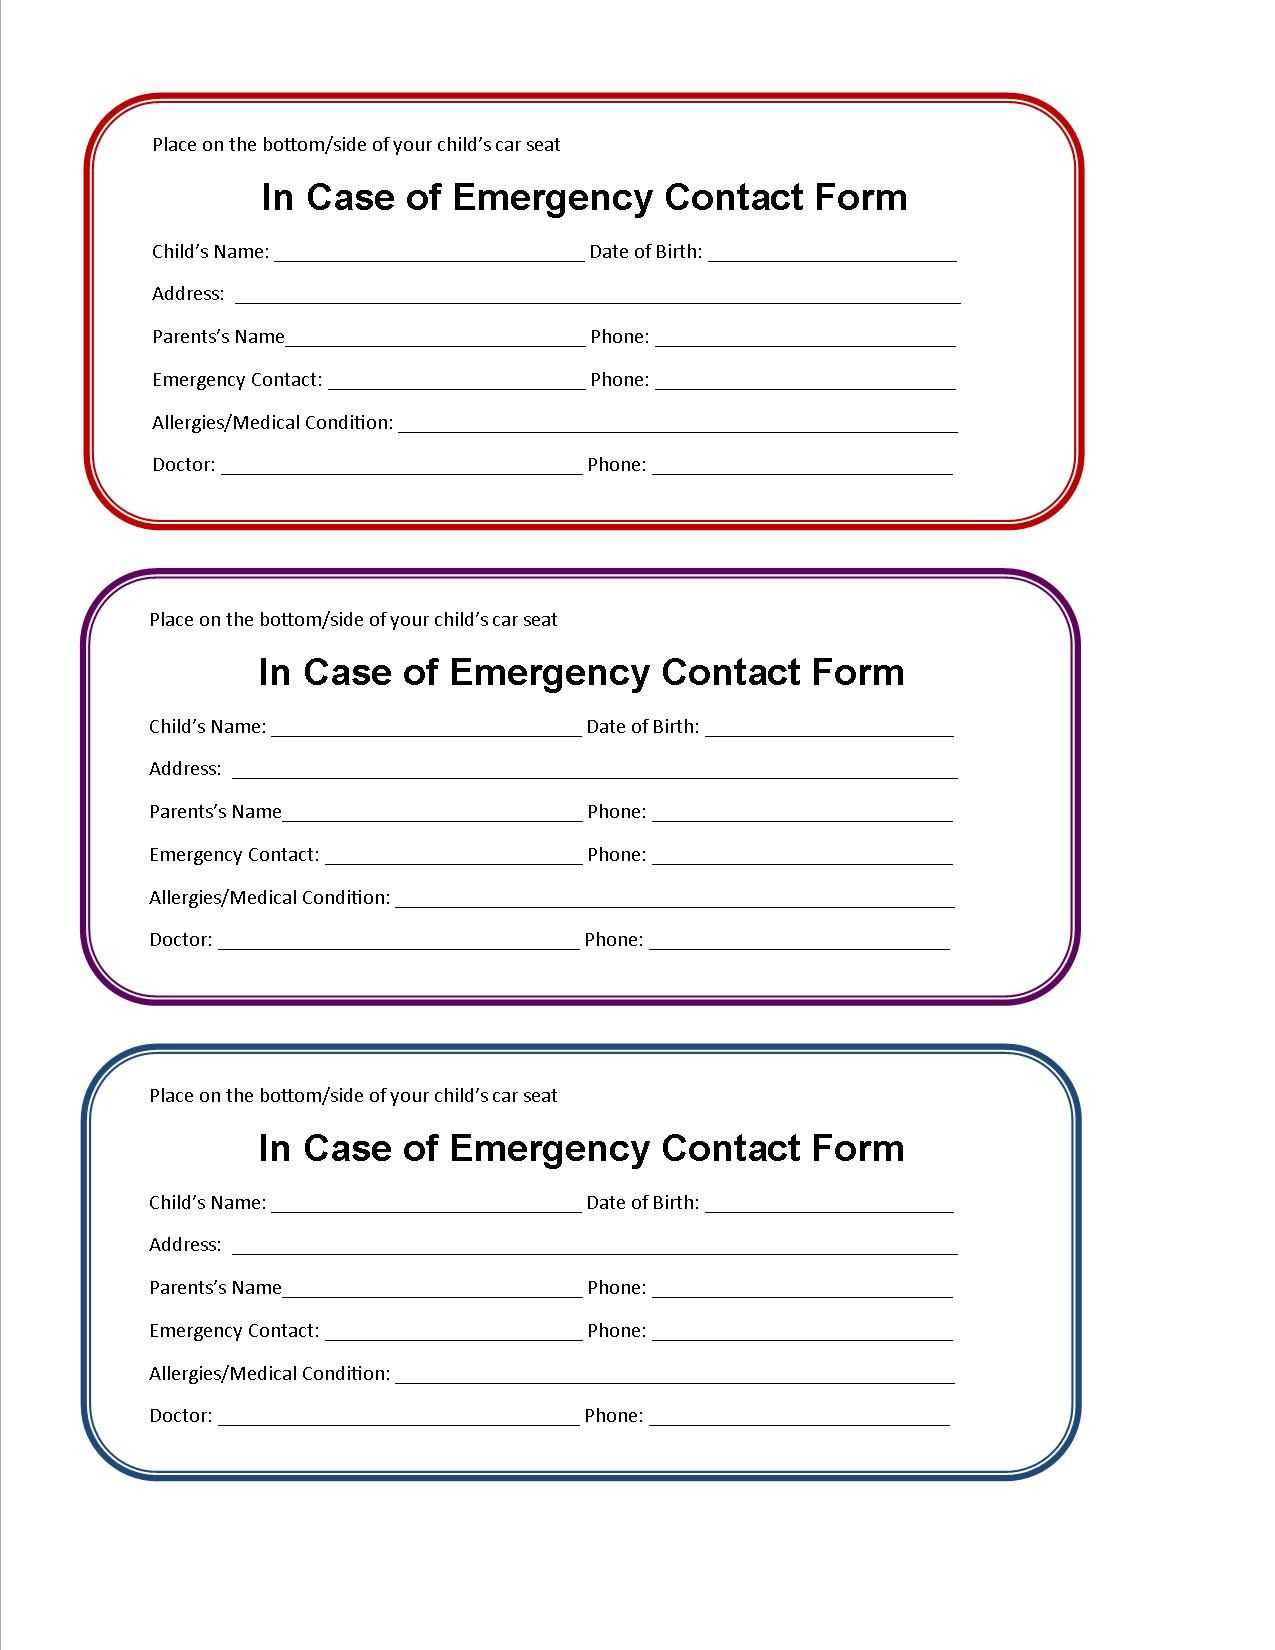 Printable Emergency Contact Form For Car Seat | Emergency For Emergency Contact Card Template